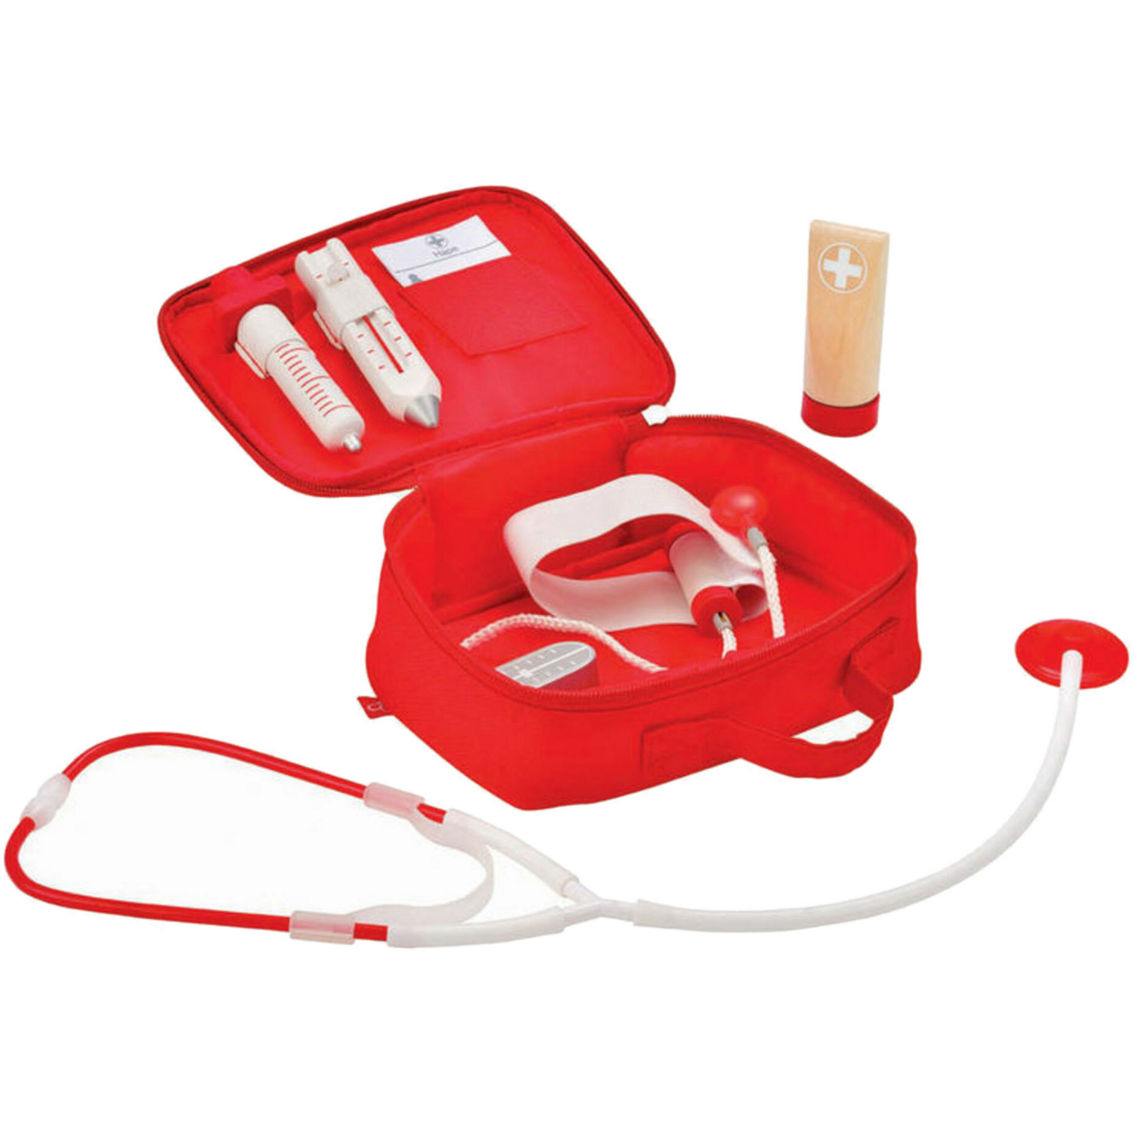 Doctor on Call Wooden Roleplay and Accessory Set - Image 3 of 5